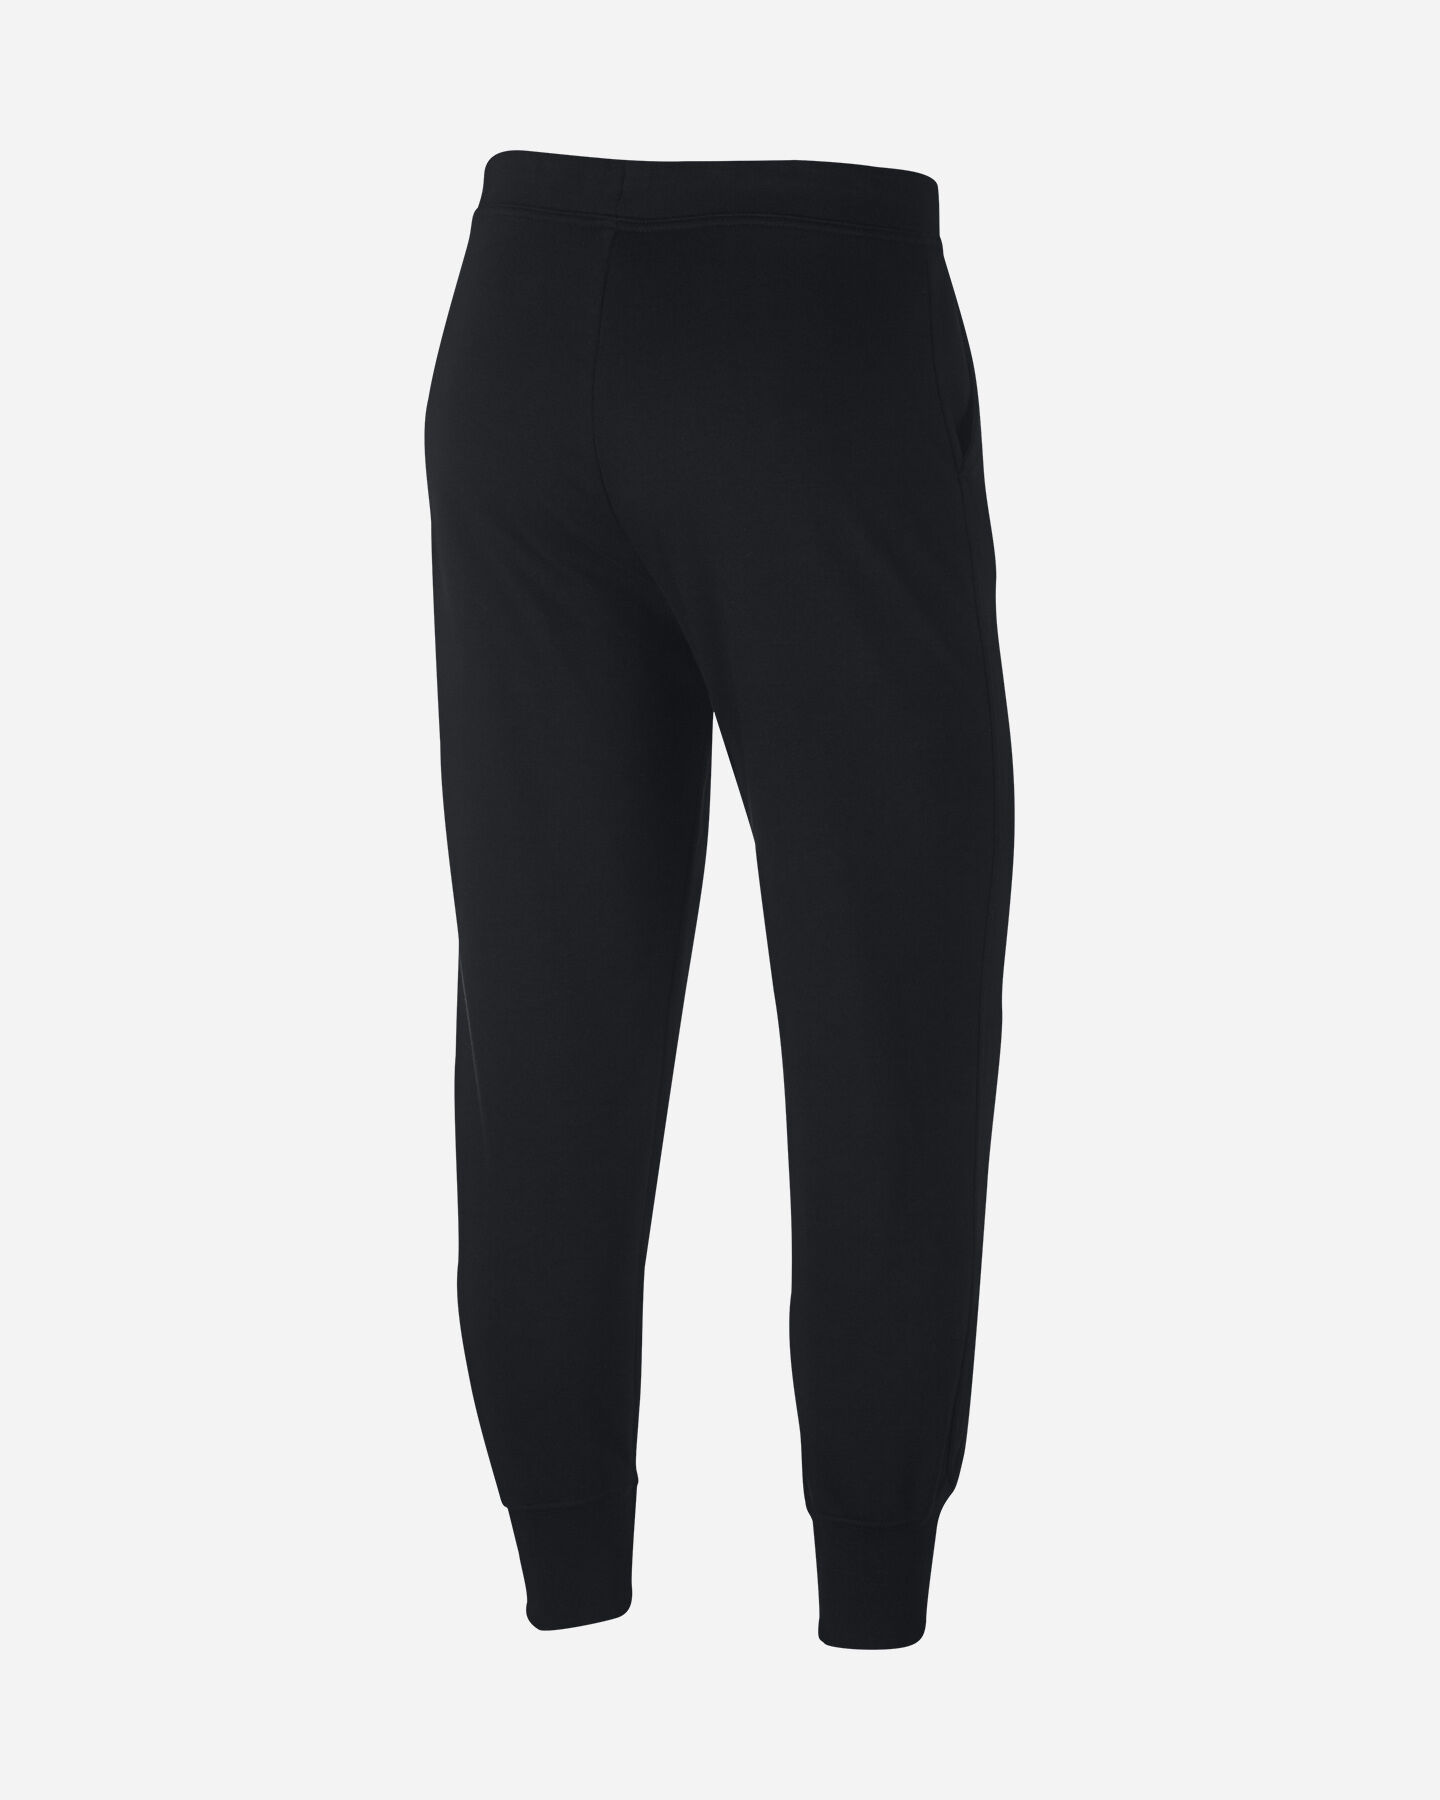  Pantalone training NIKE DRY GET FIT W S5268717 scatto 1